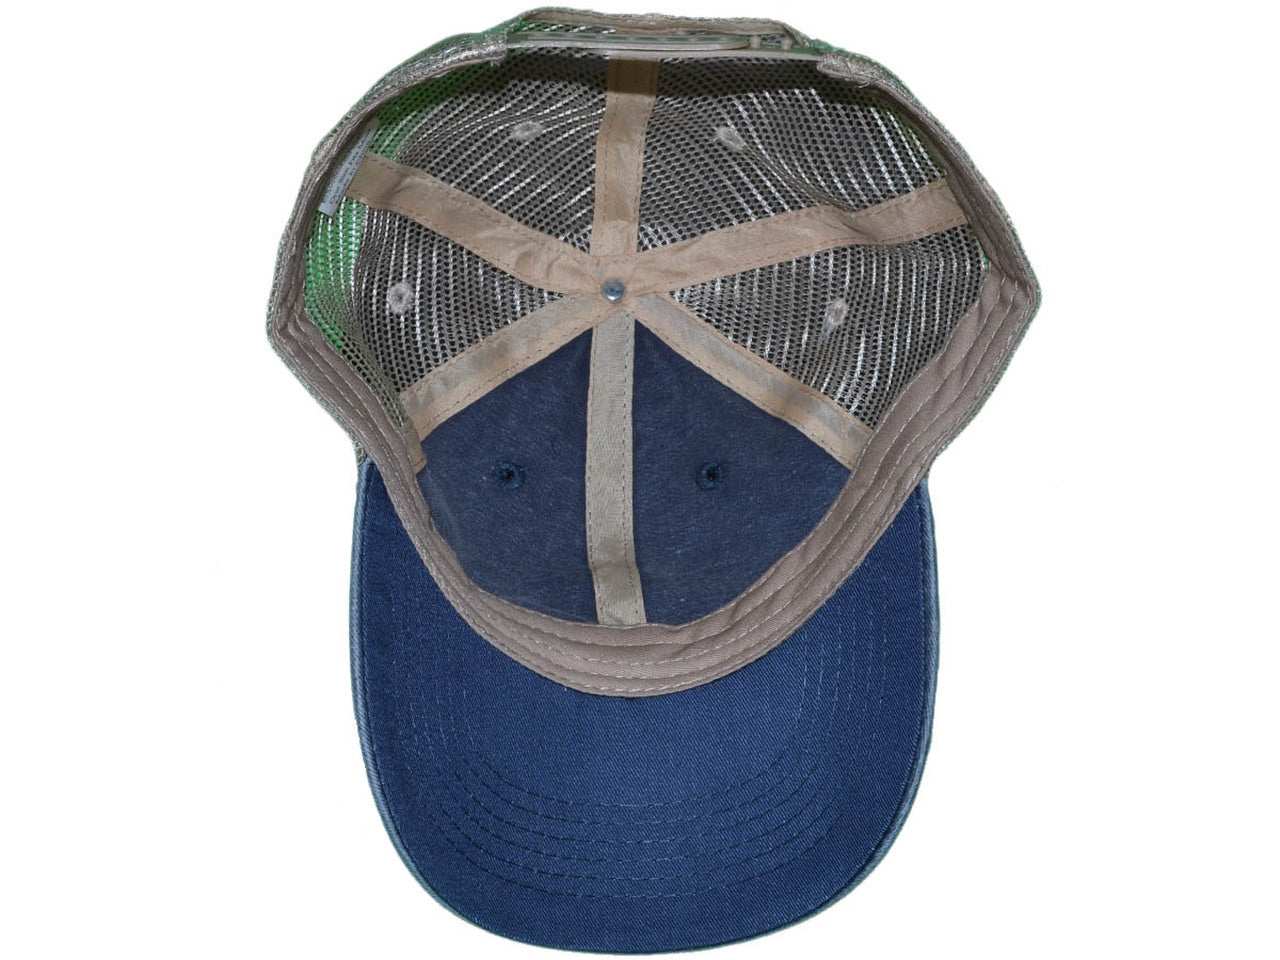 PIGMENT DYED  VINTAGE TRUCKER HATS, BUCKLE BACK